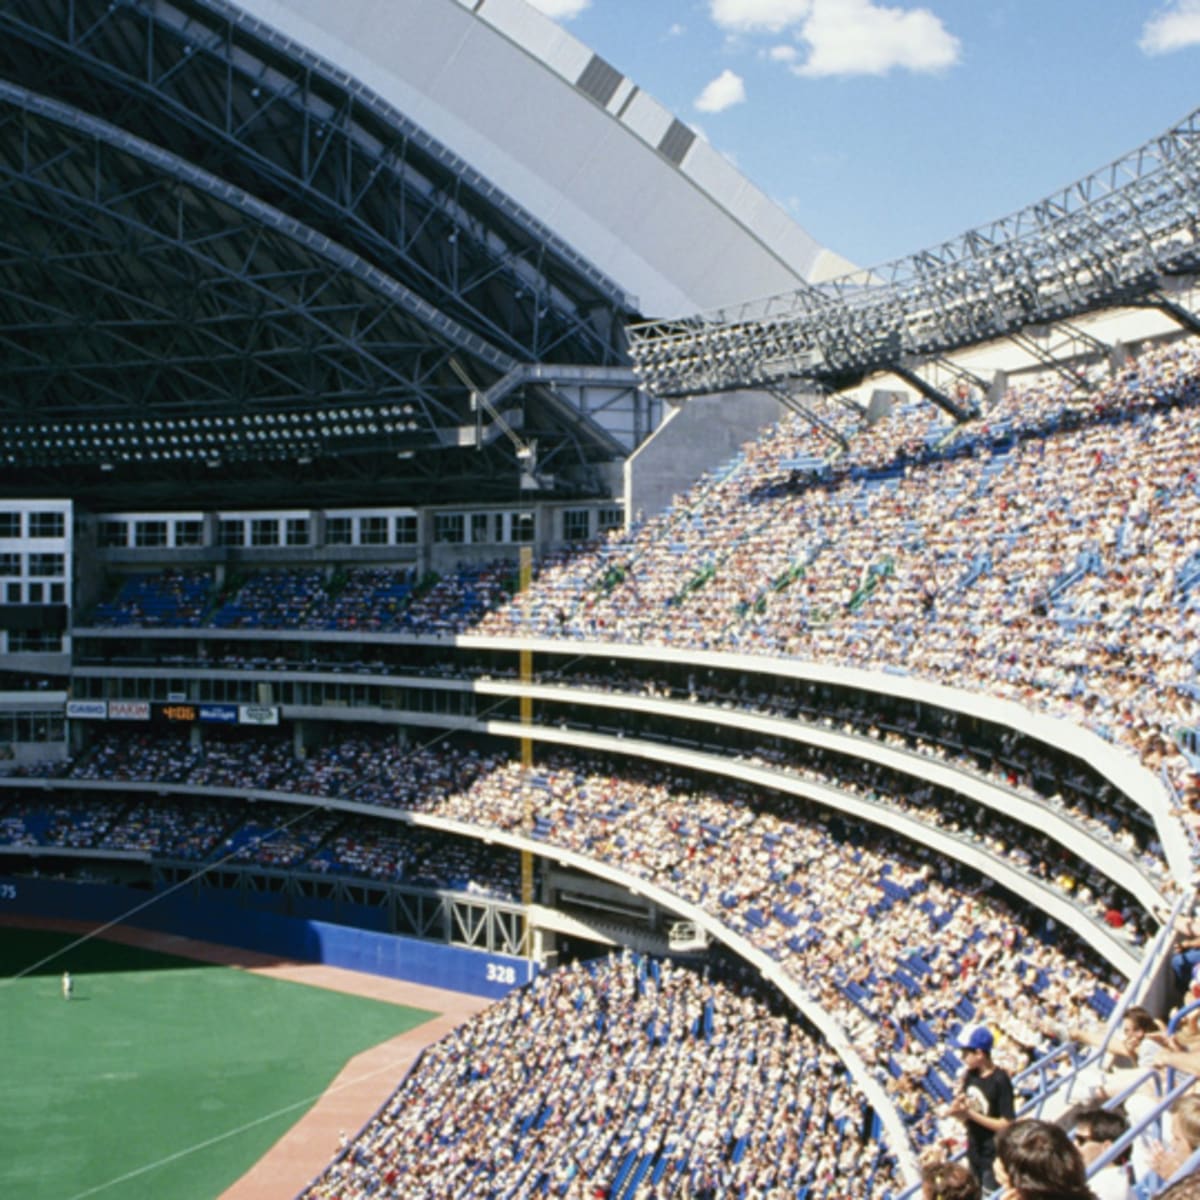 Rogers Centre Roof Status - Is it Open or Closed?